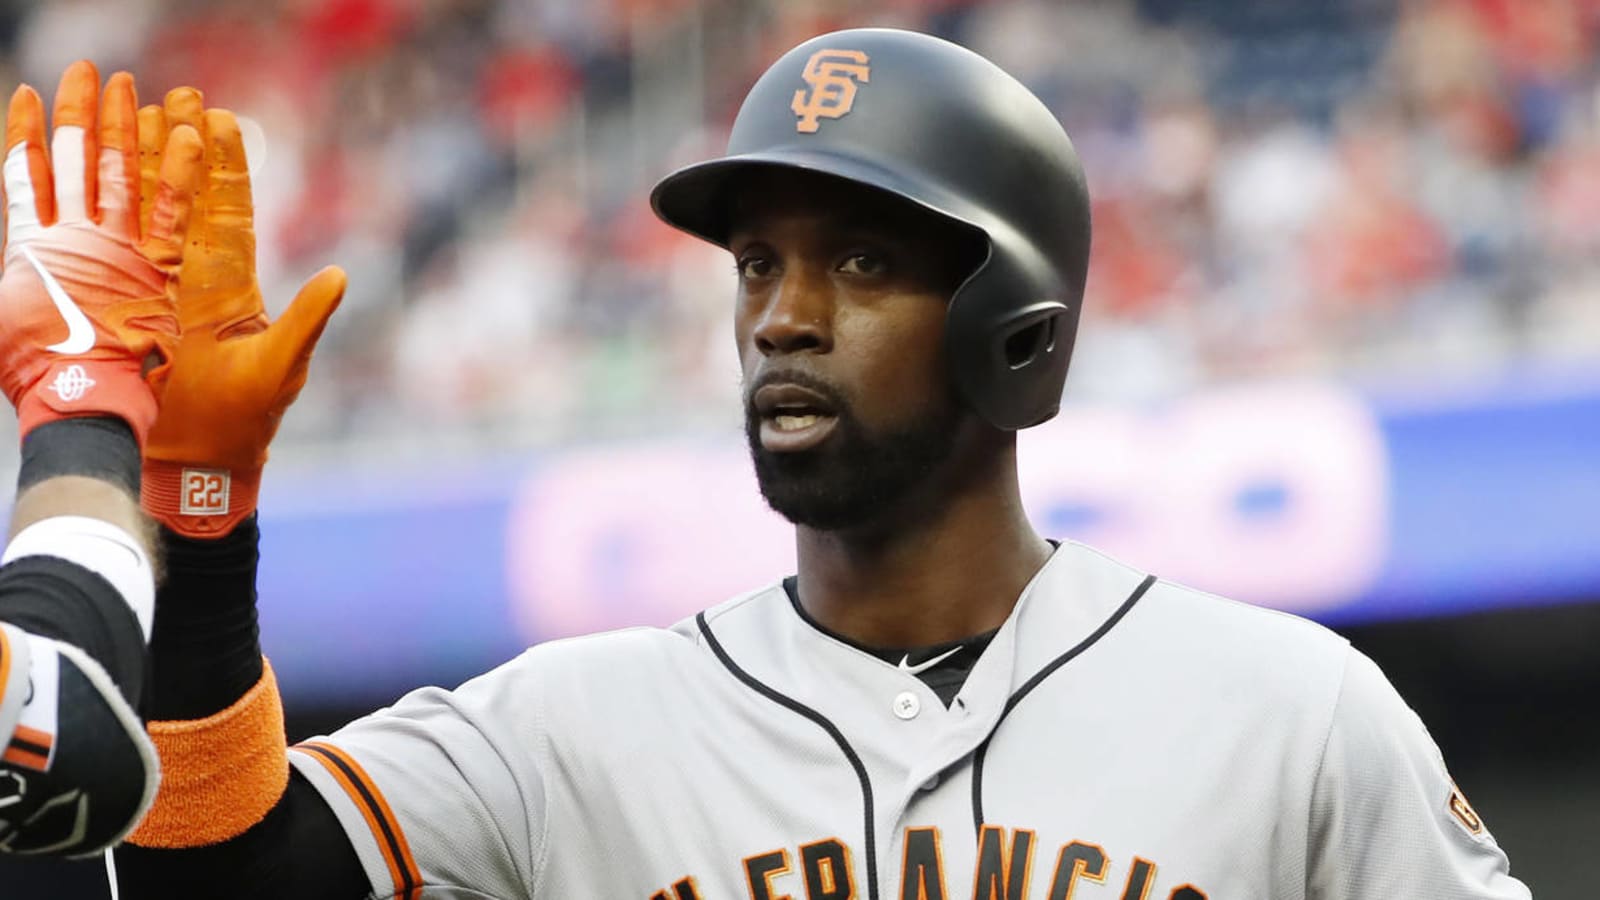 Giants GM hopes Andrew McCutchen wins World Series with Yankees